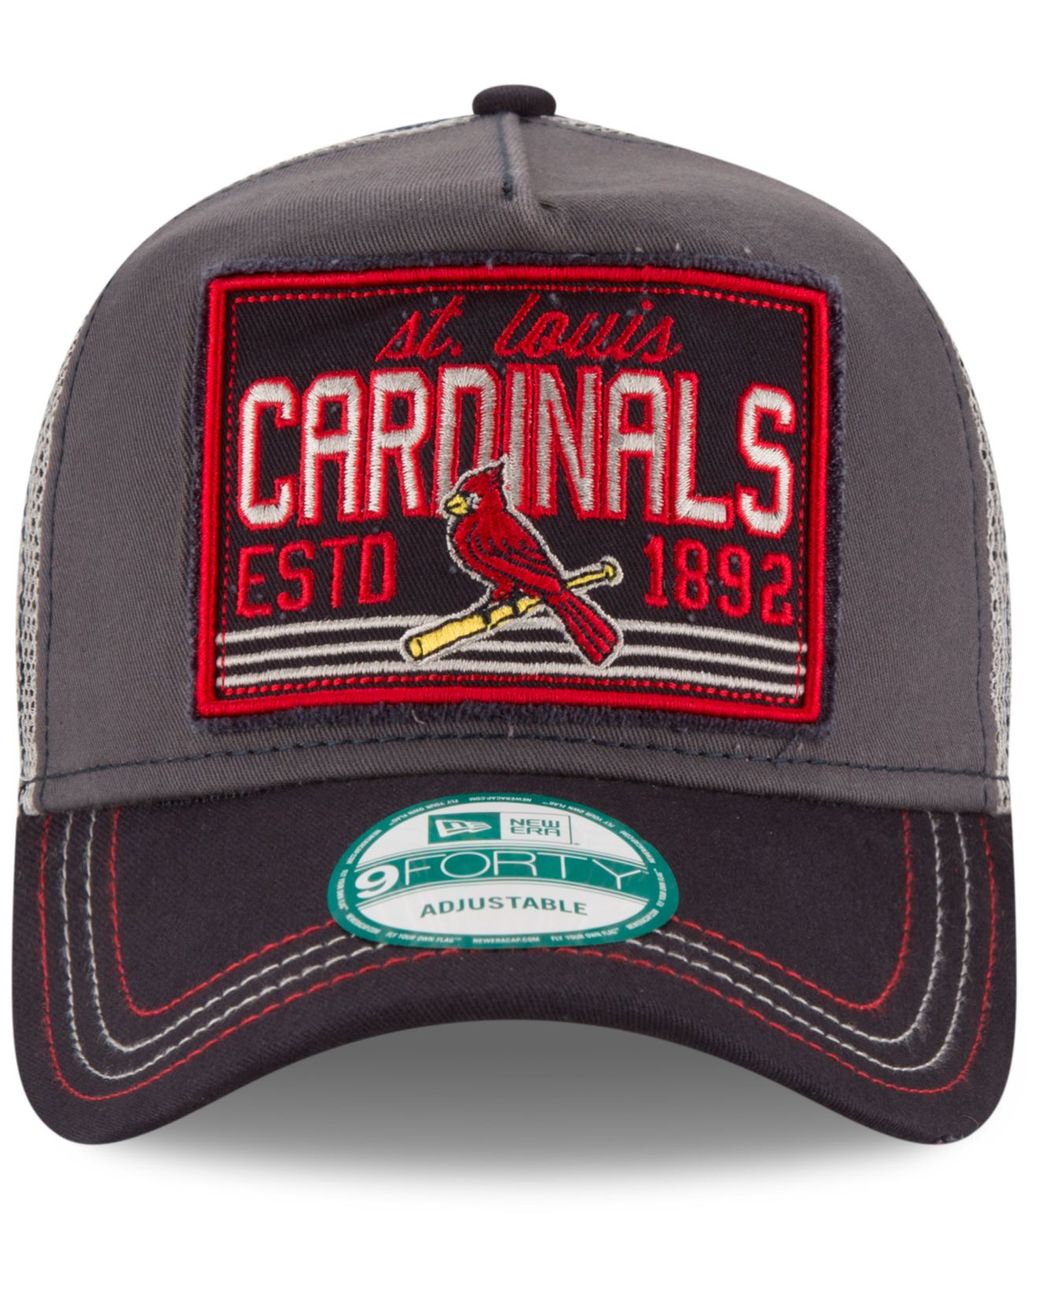 New Era Men's Red St. Louis Cardinals 2006 World Series Side Patch 9FIFTY Snapback Hat - Red